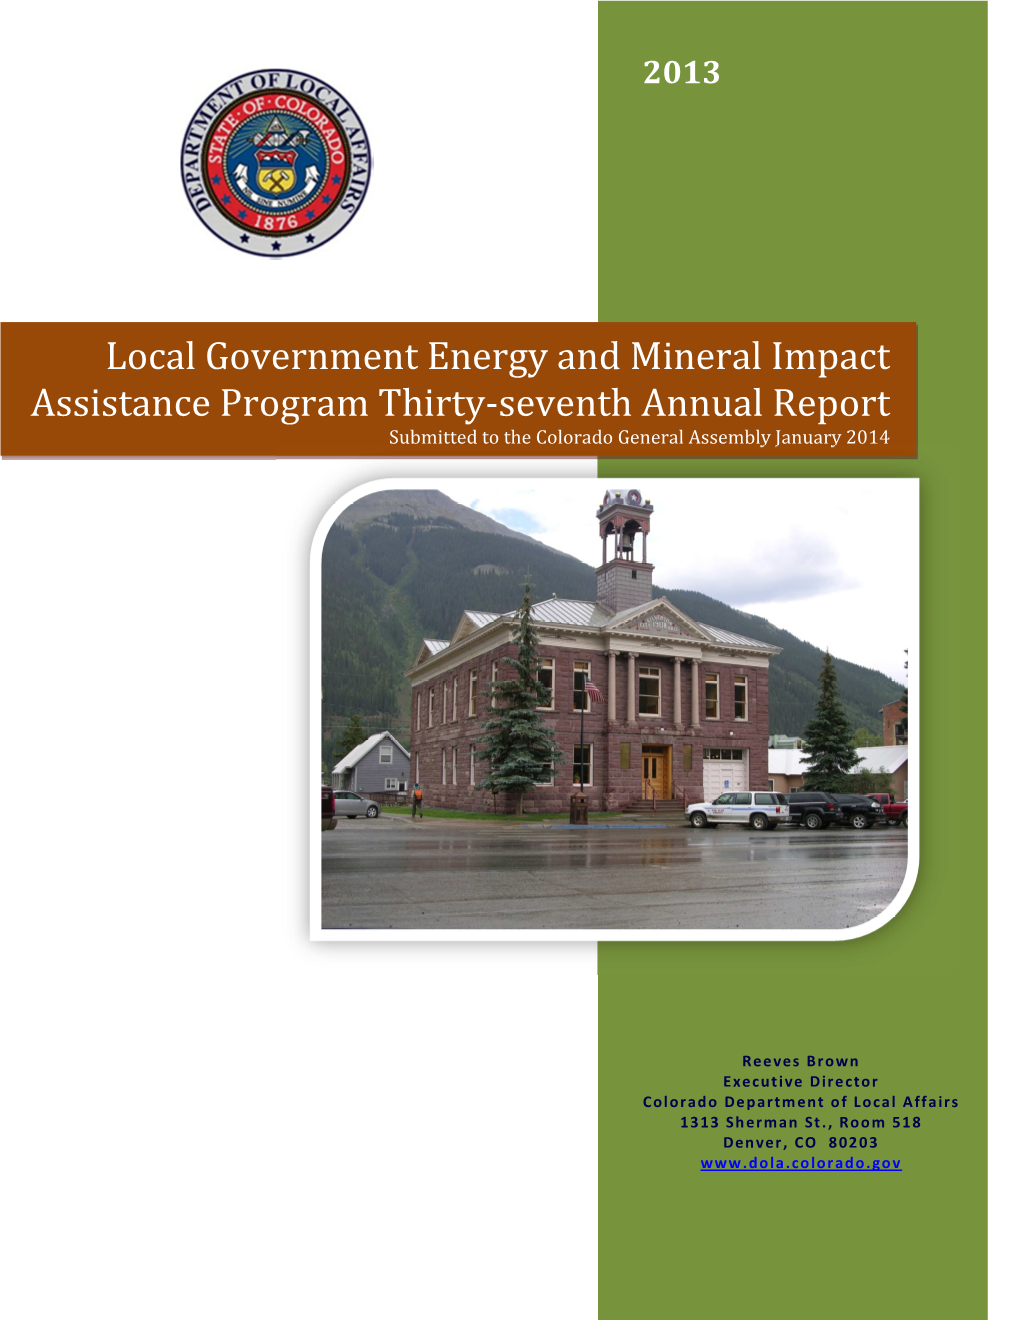 2013 Energy Impact Annual Report Final